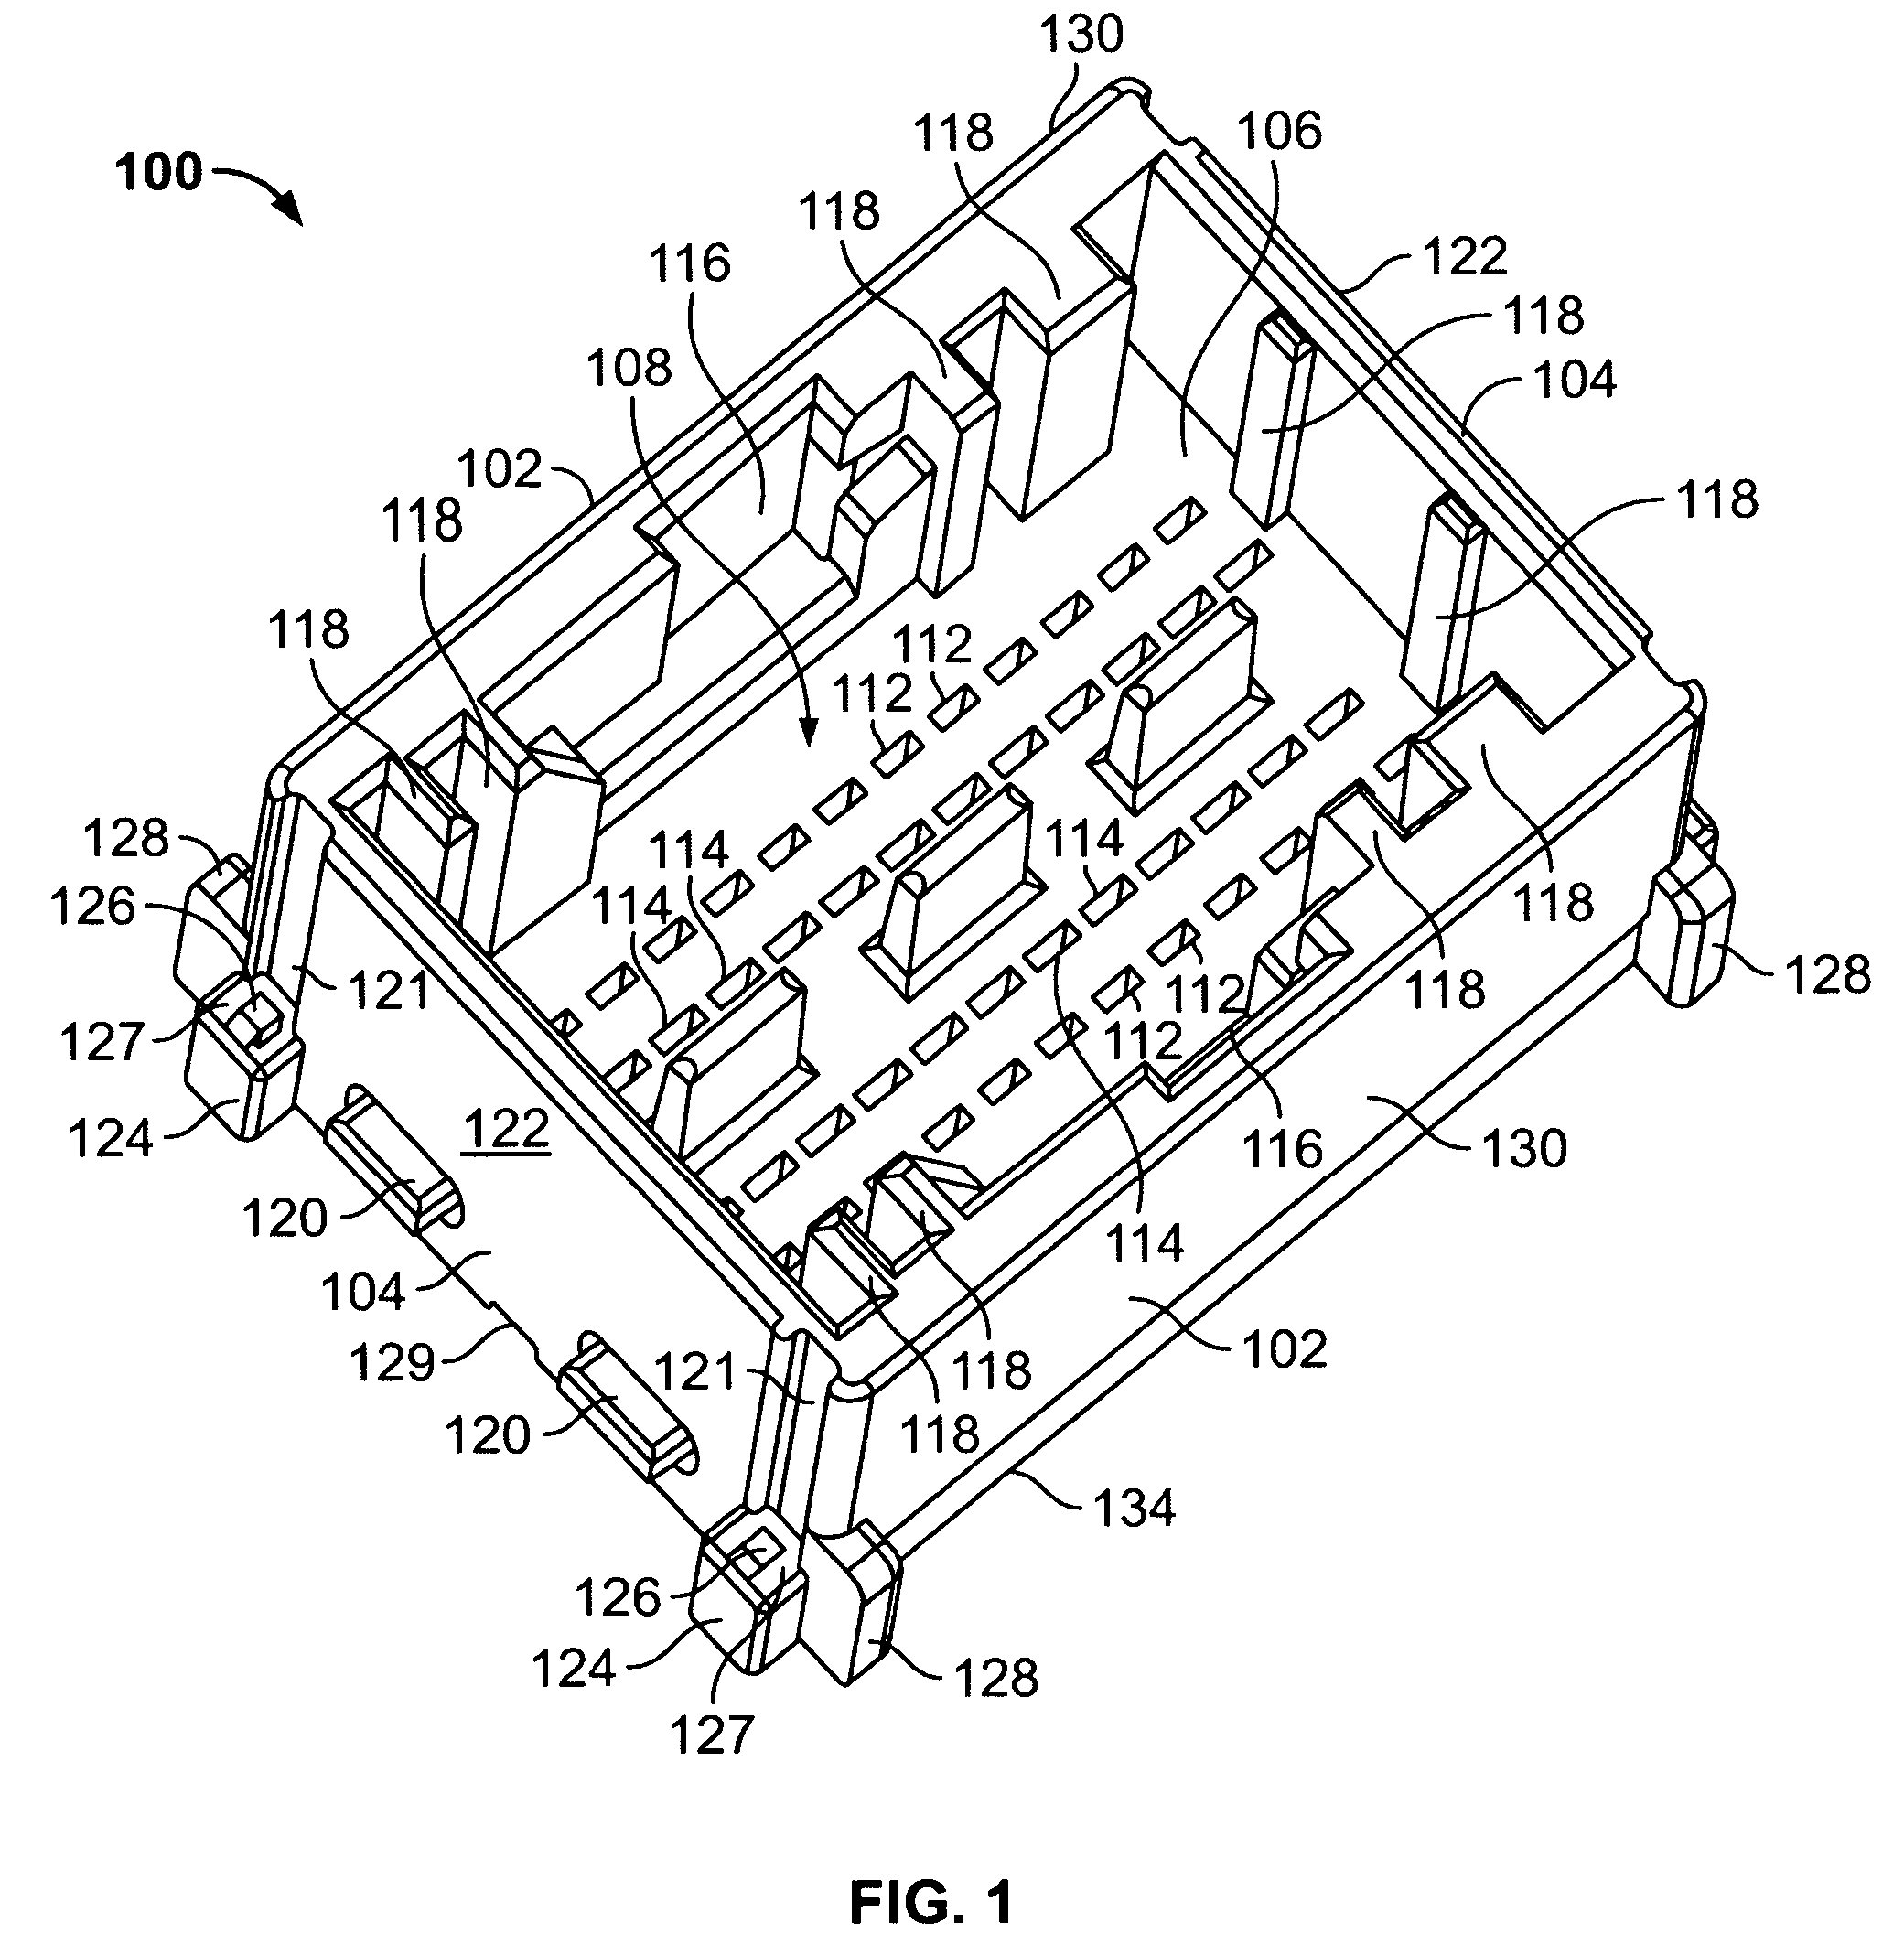 Surface mount header assembly having a planar alignment surface